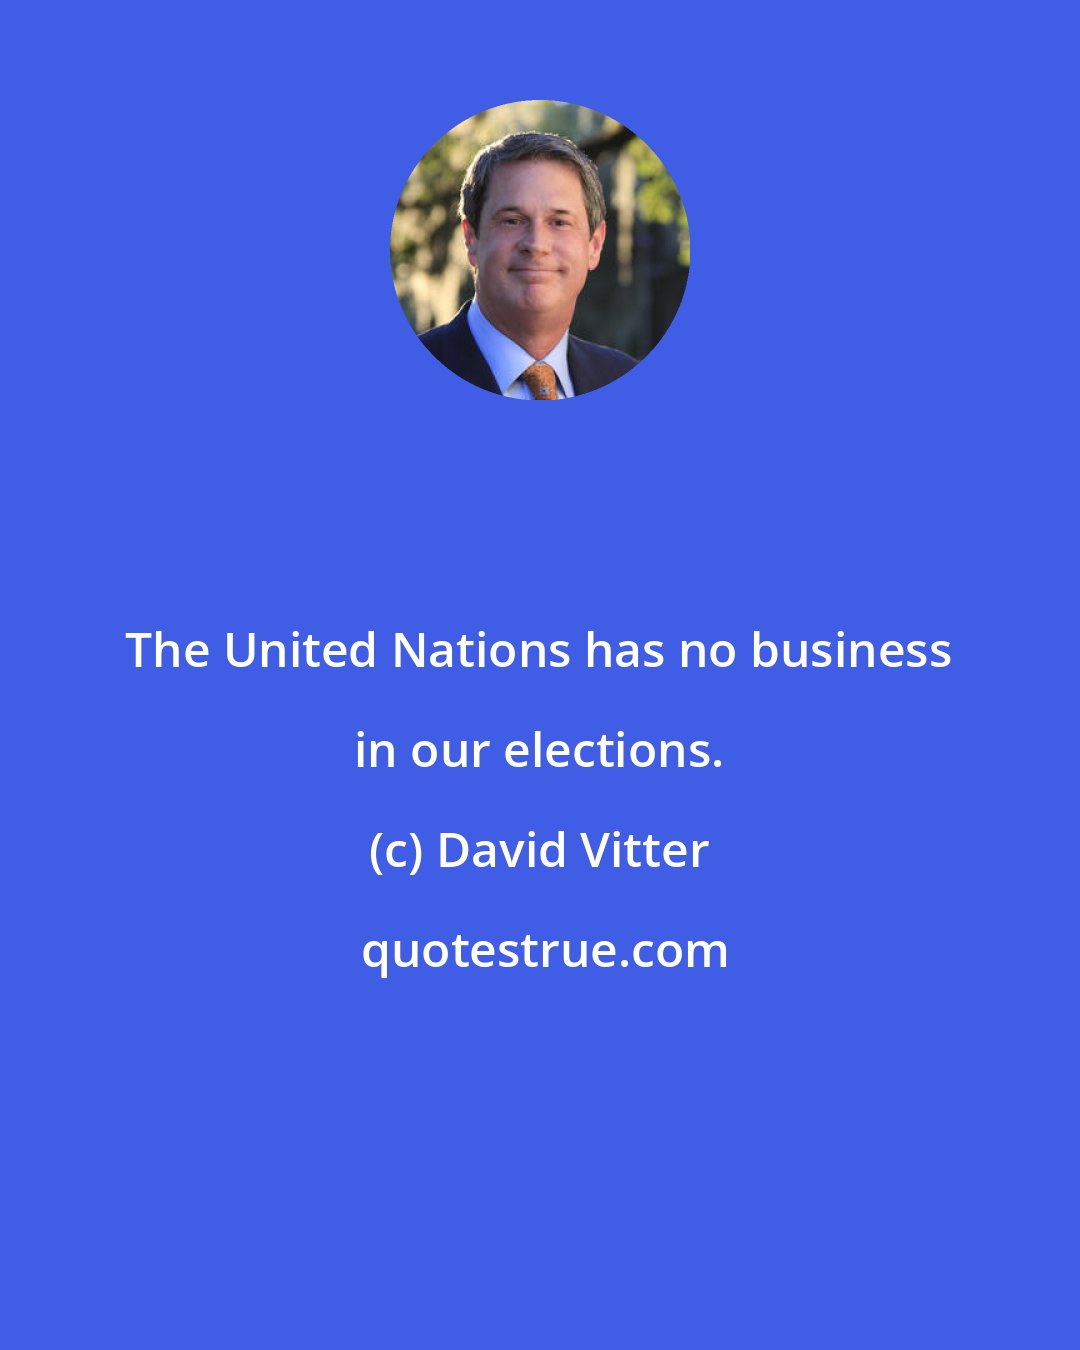 David Vitter: The United Nations has no business in our elections.